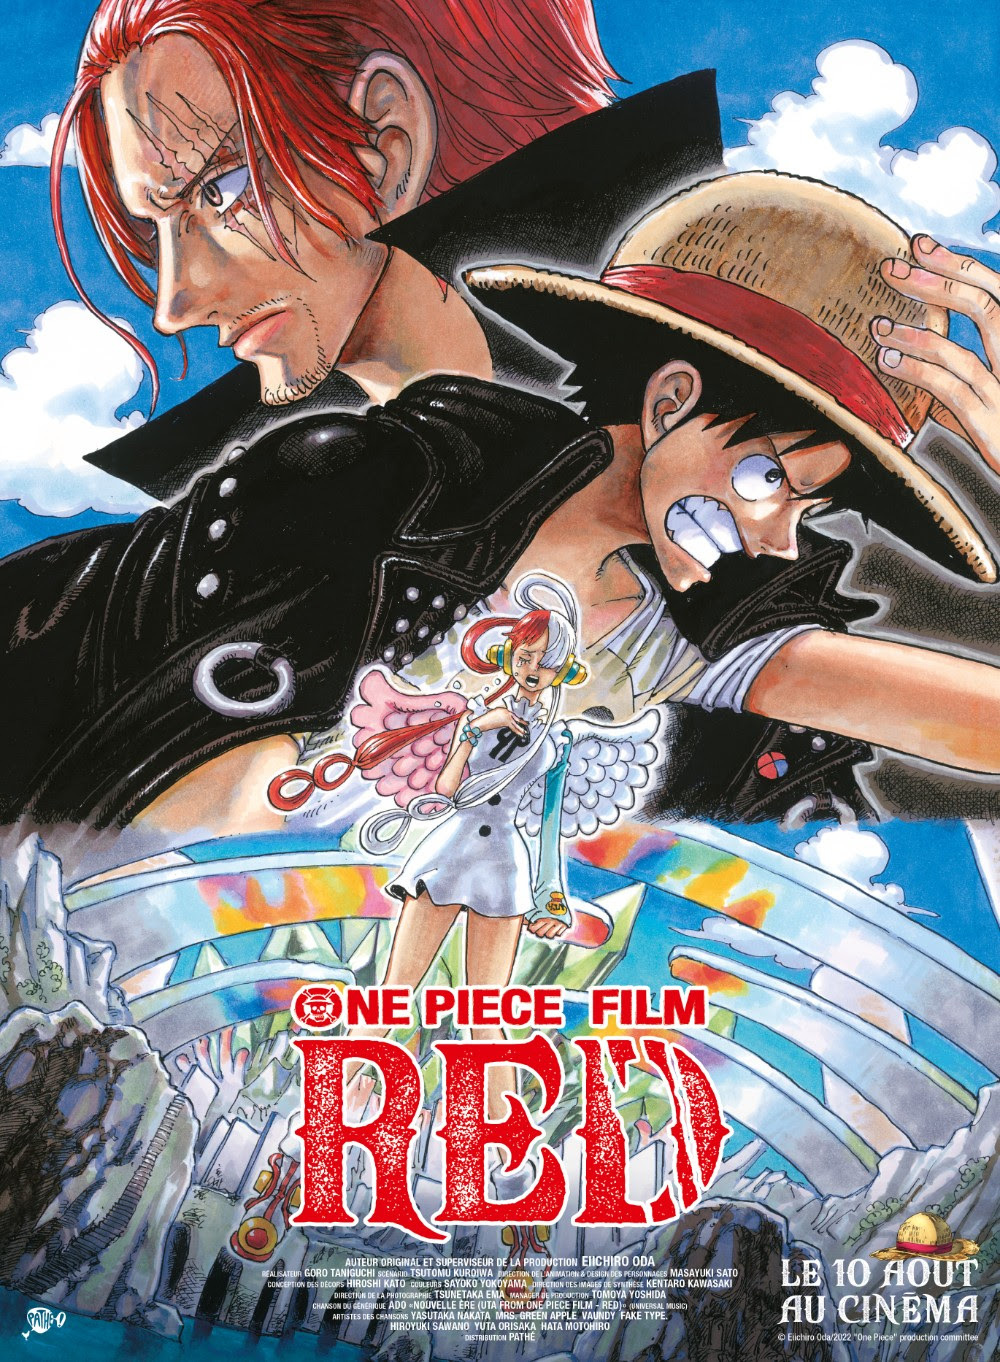 One Piece Film - Red / Copyright O/2022 OP